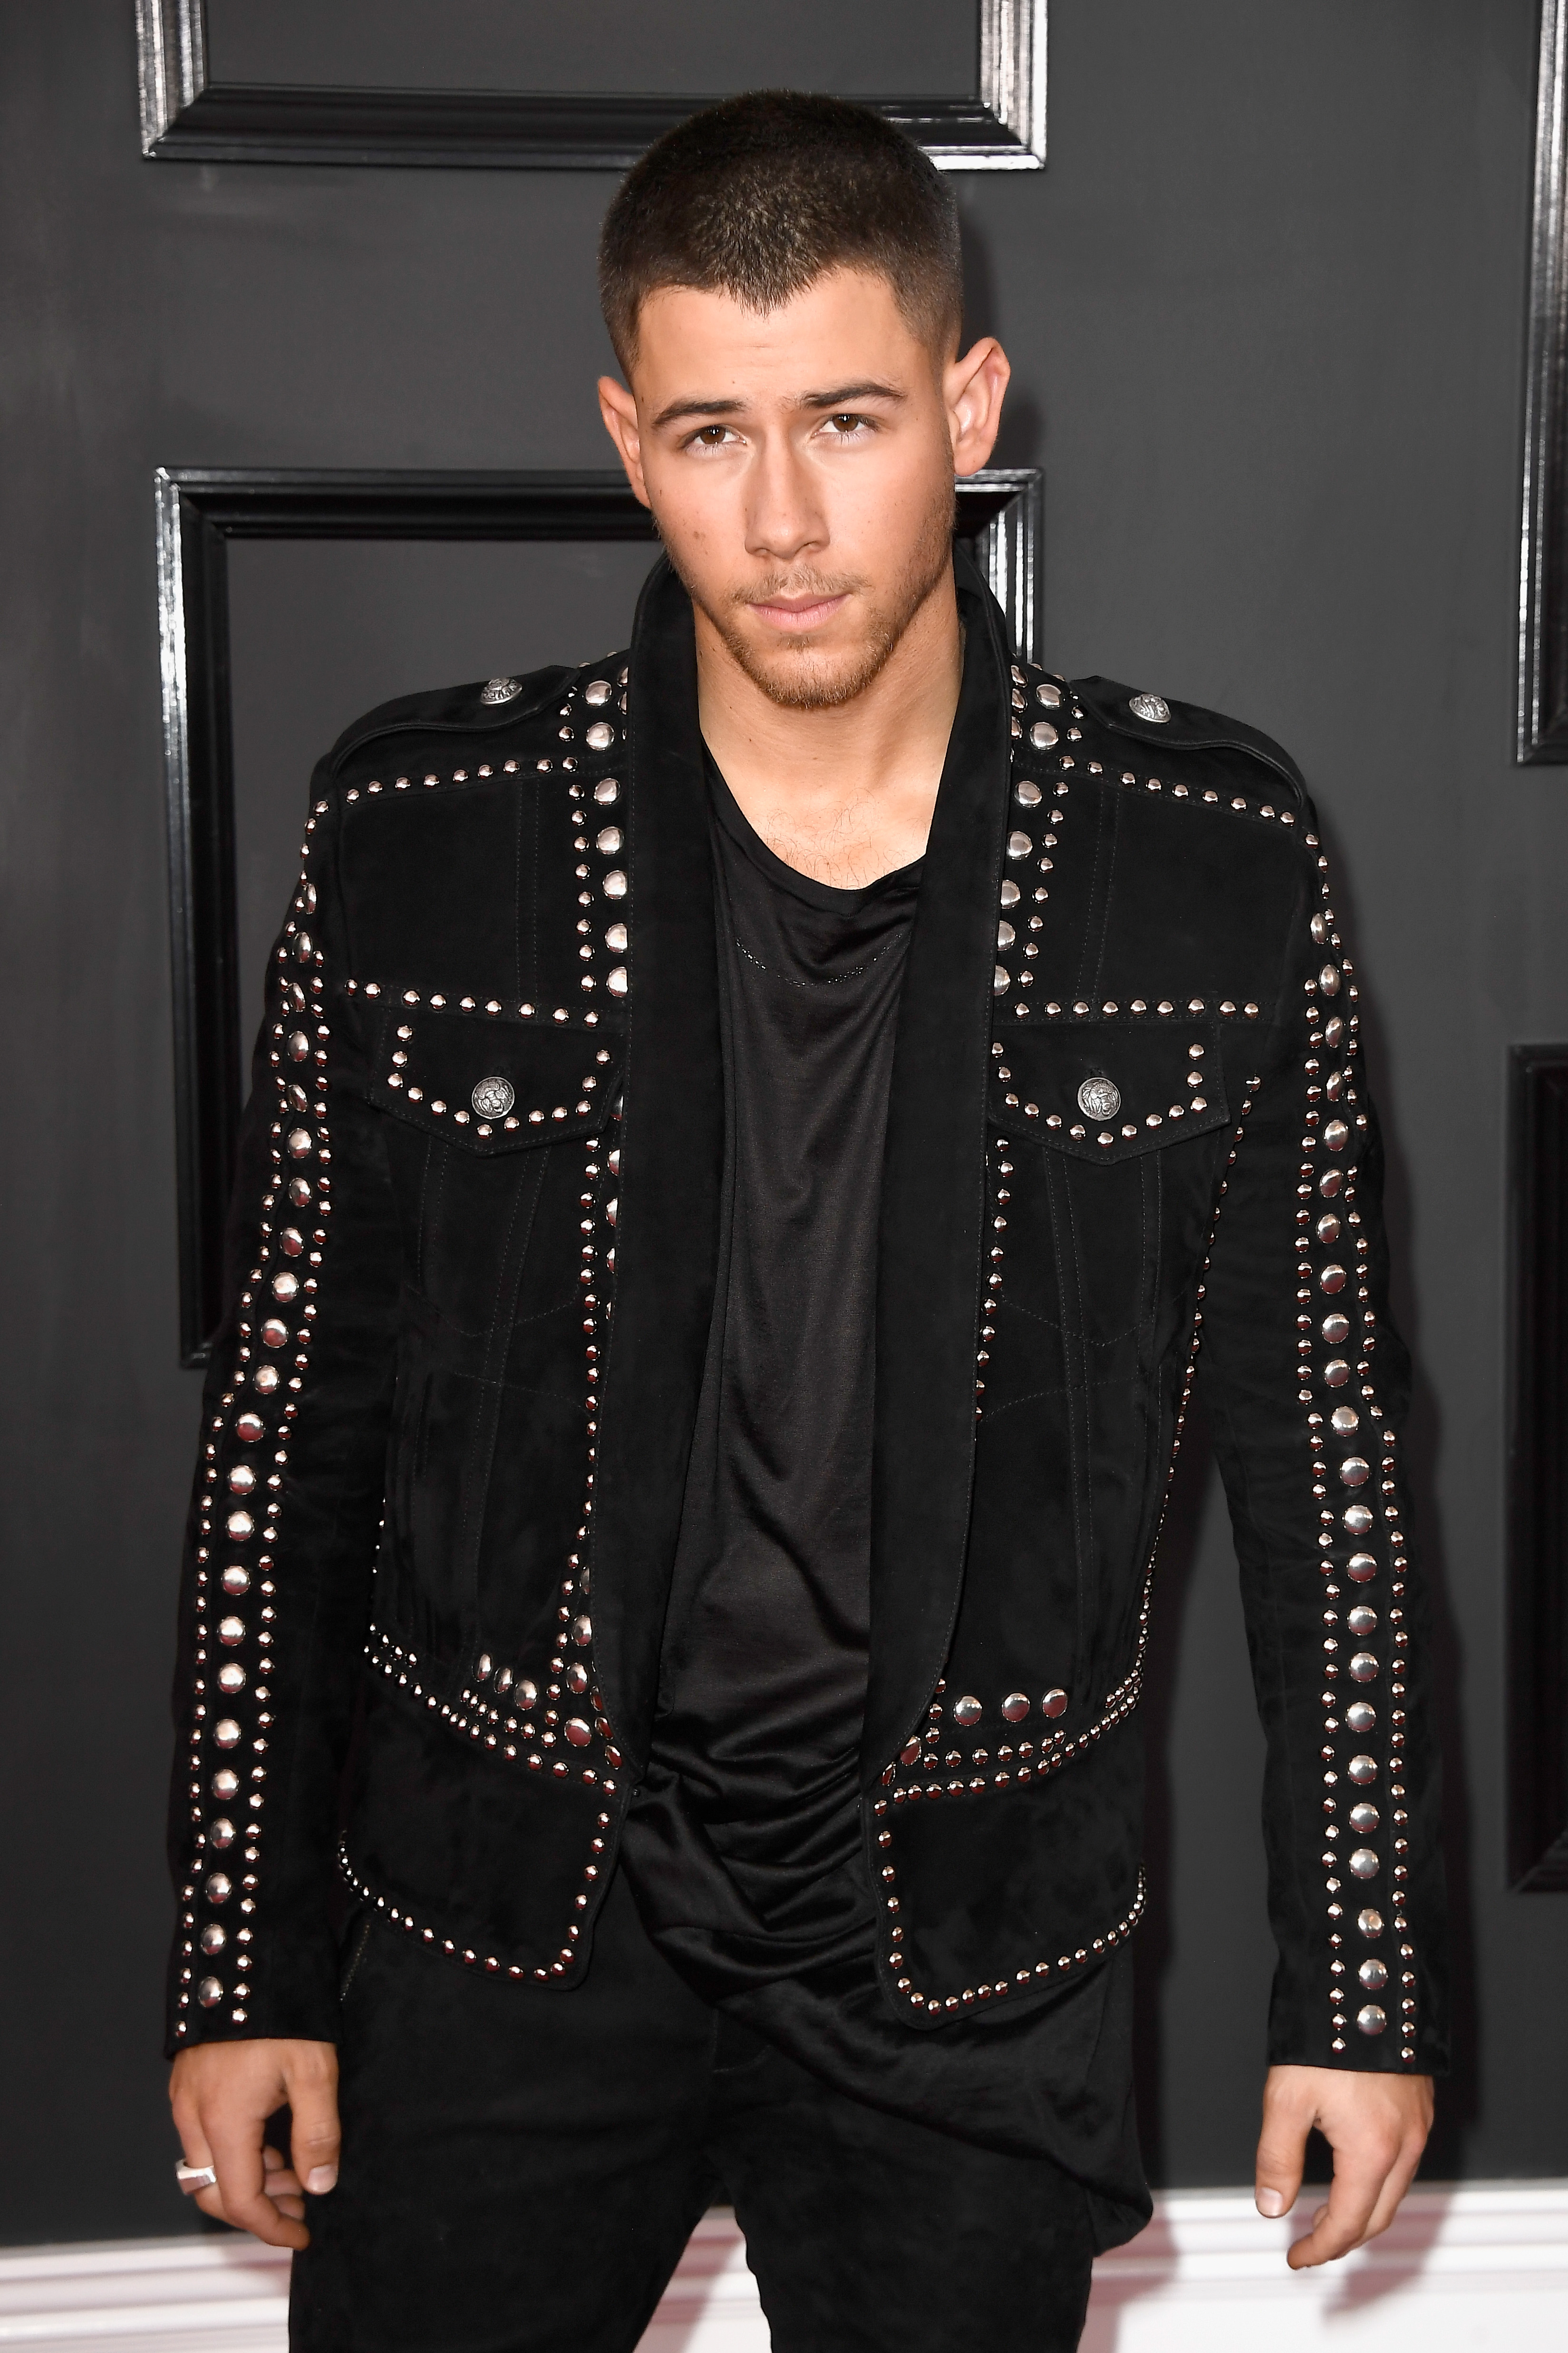 LOS ANGELES, CA - FEBRUARY 12: Singer Nick Jonas attends The 59th GRAMMY Awards at STAPLES Center on February 12, 2017 in Los Angeles, California. Frazer Harrison/Getty Images/AFP